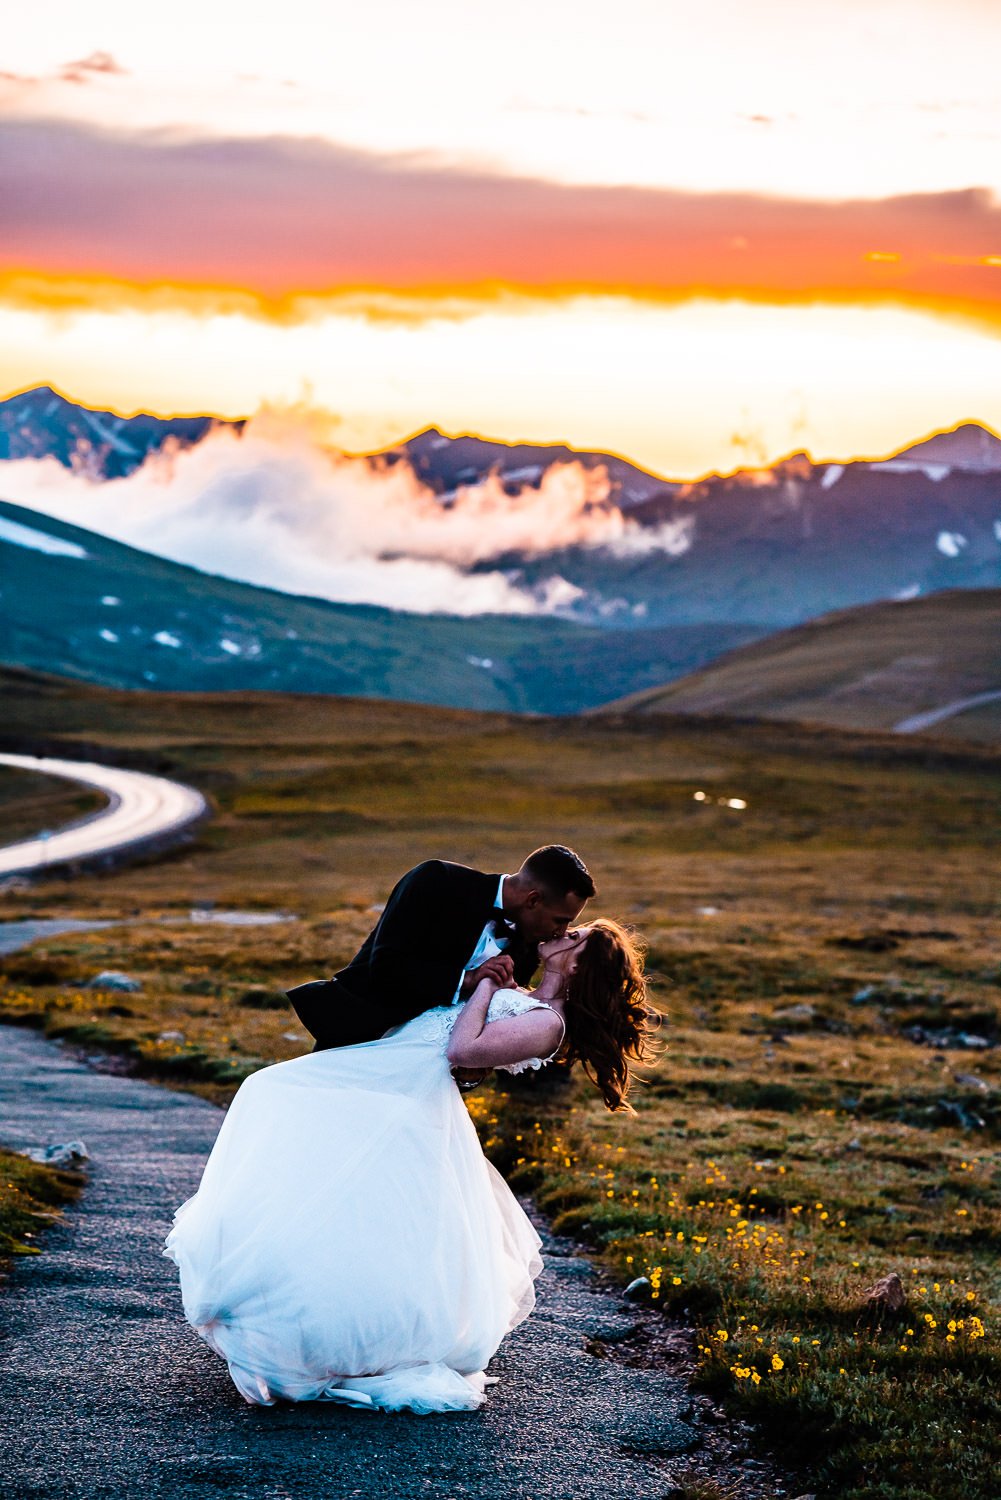 A couple embraces in a breathtaking elopement photoshoot, sharing a passionate kiss on a scenic road with majestic mountains as their backdrop.